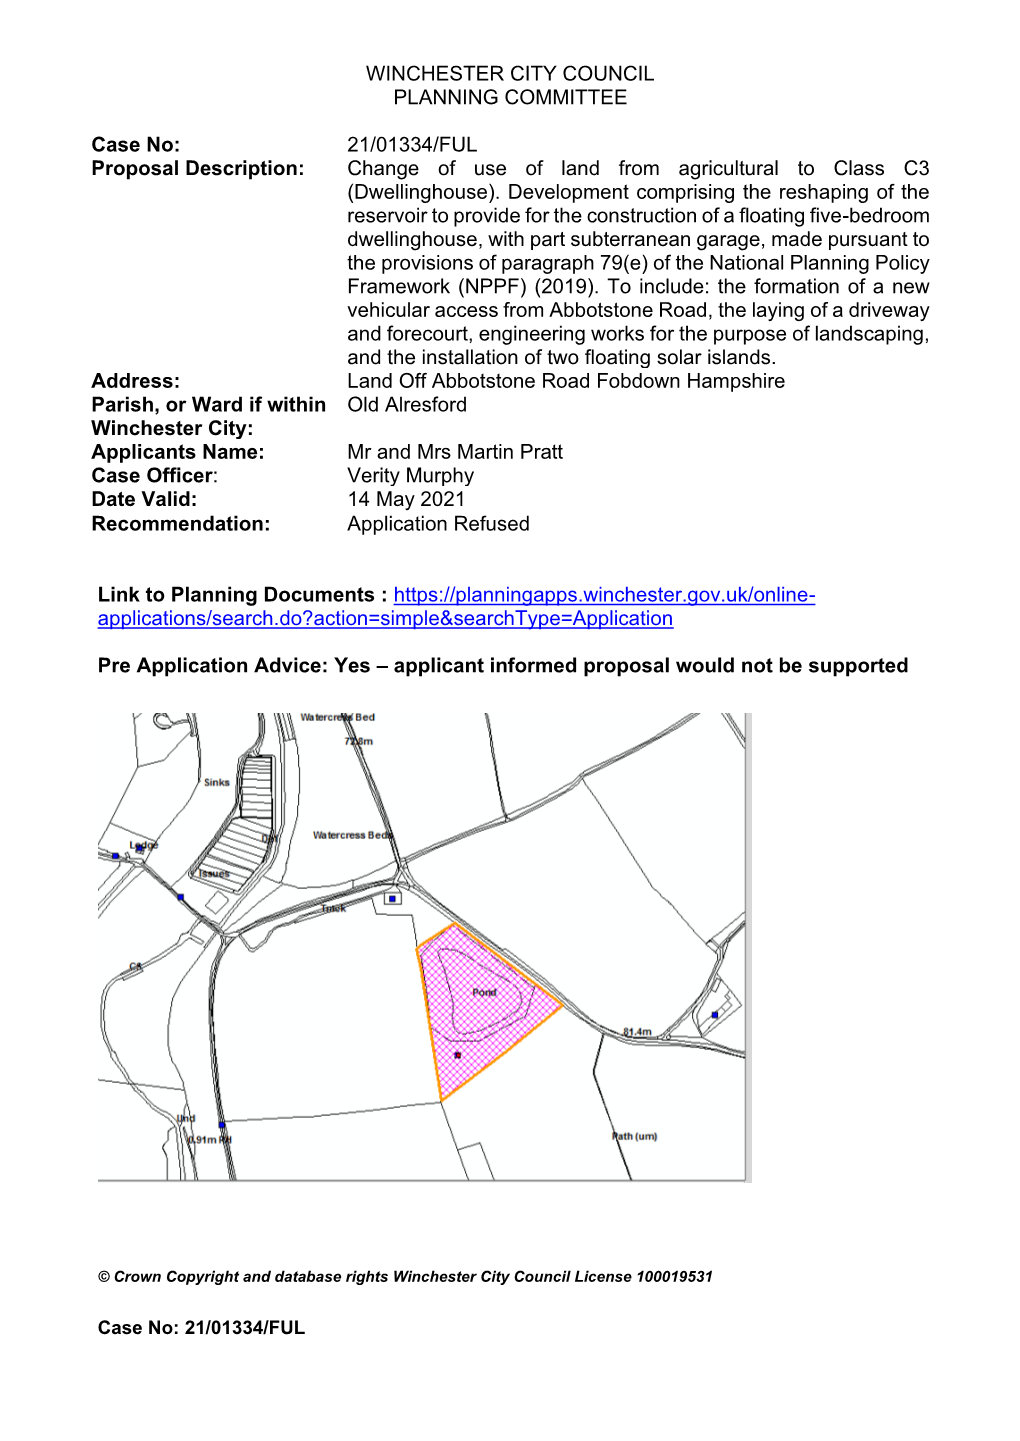 21/01334/FUL Proposal Description: Change of Use of Land from Agricultural to Class C3 (Dwellinghouse)